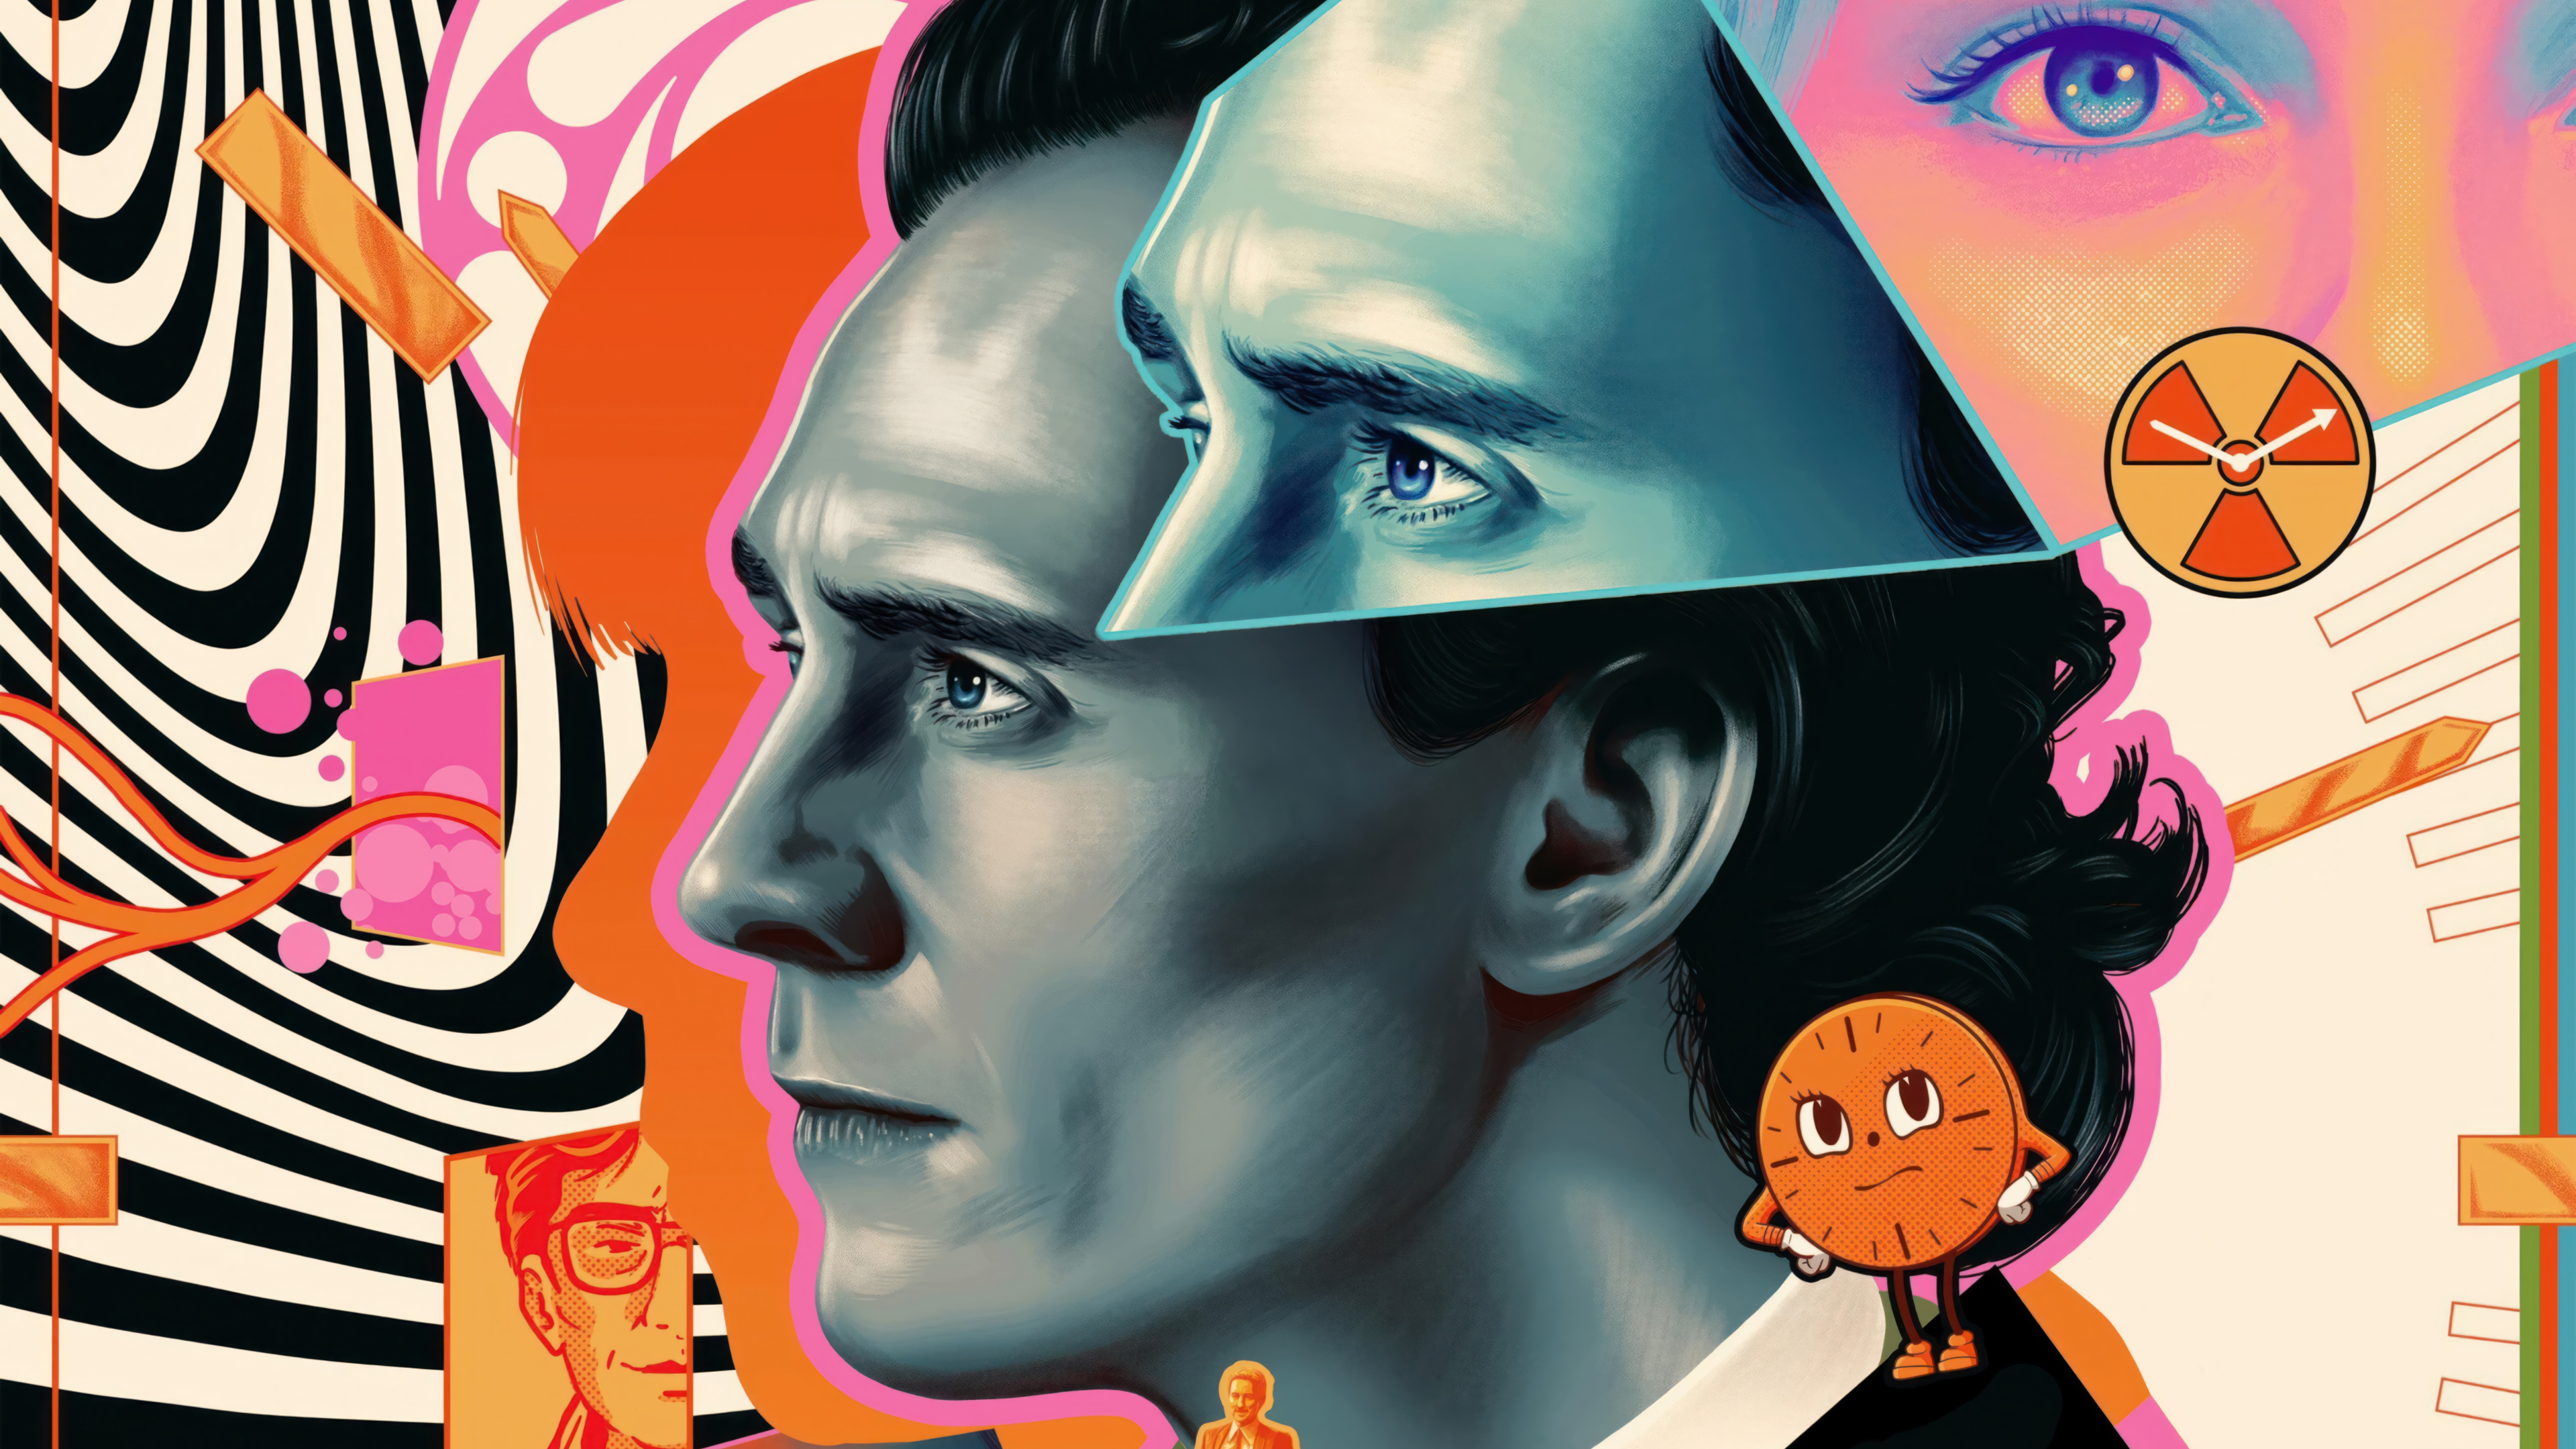 HD desktop wallpaper featuring a stylized illustration of the Marvel character Loki, portrayed by Tom Hiddleston, with vibrant pop art elements and symbols related to the character's storyline.